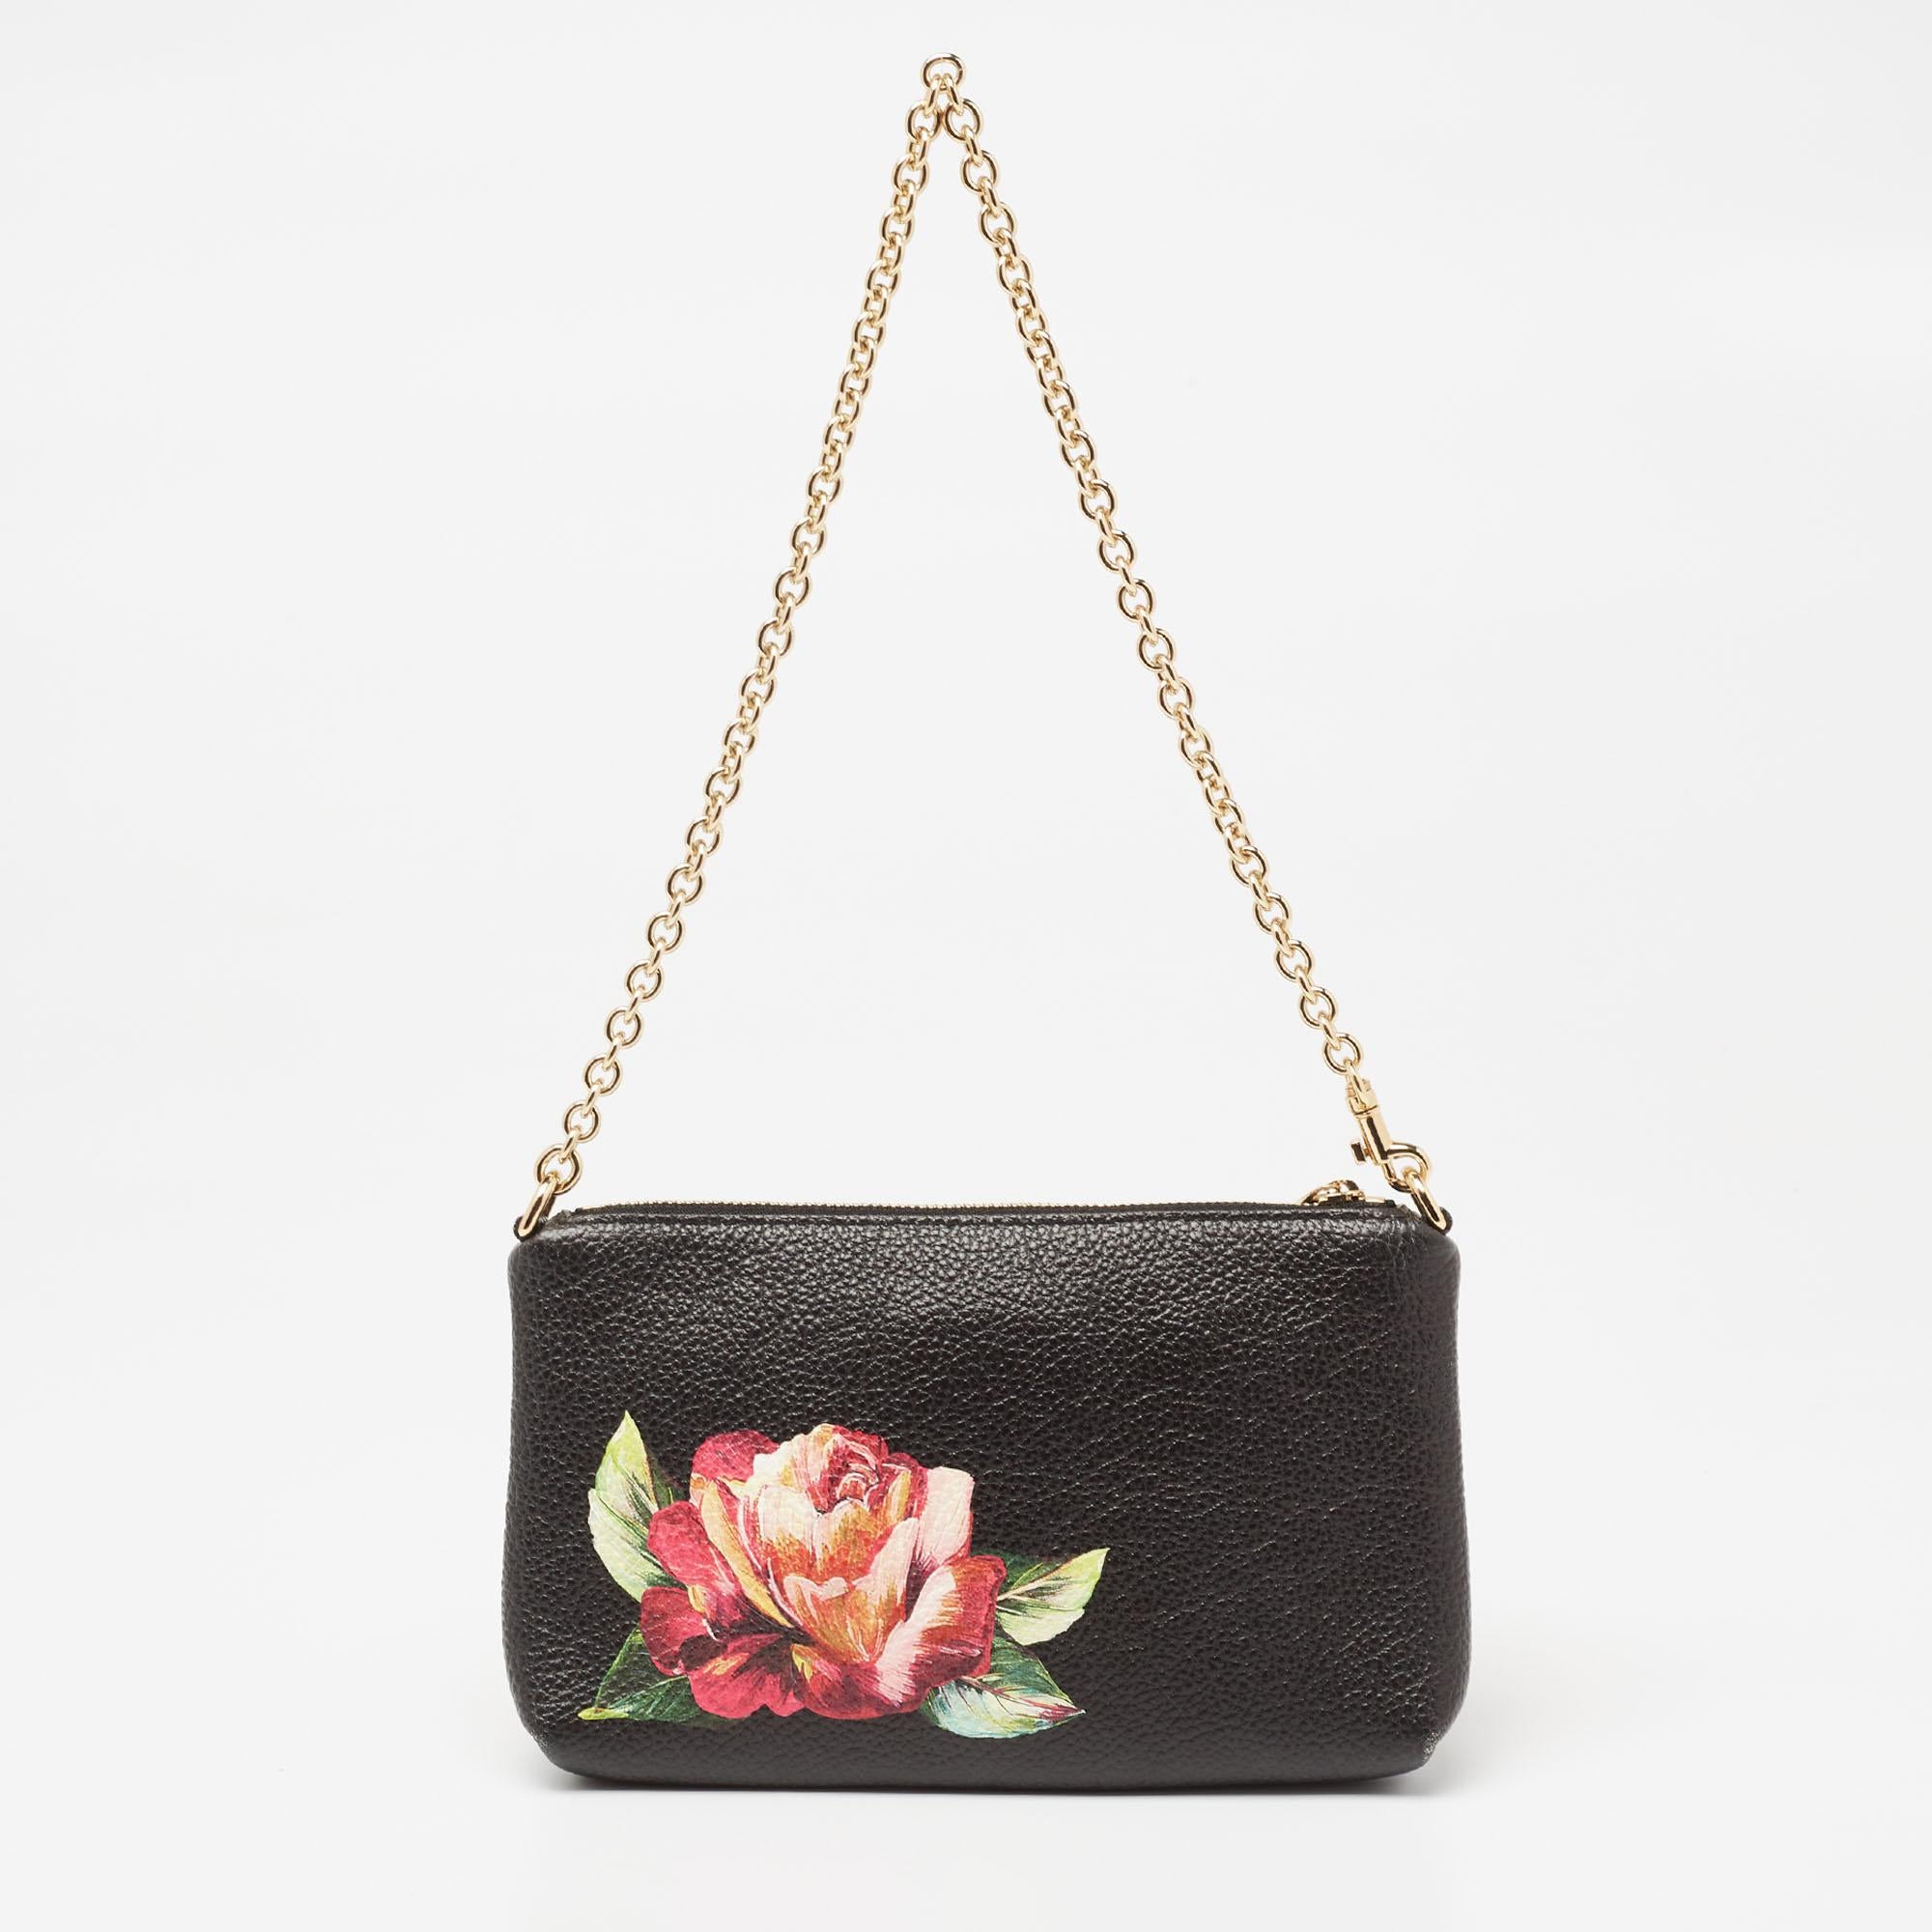 This Dolce & Gabbana clutch is just the right accessory to compliment your chic ensemble. It comes crafted in quality material featuring a roomy interior that can comfortably hold all your little essentials like lipstick, cards, and phone.